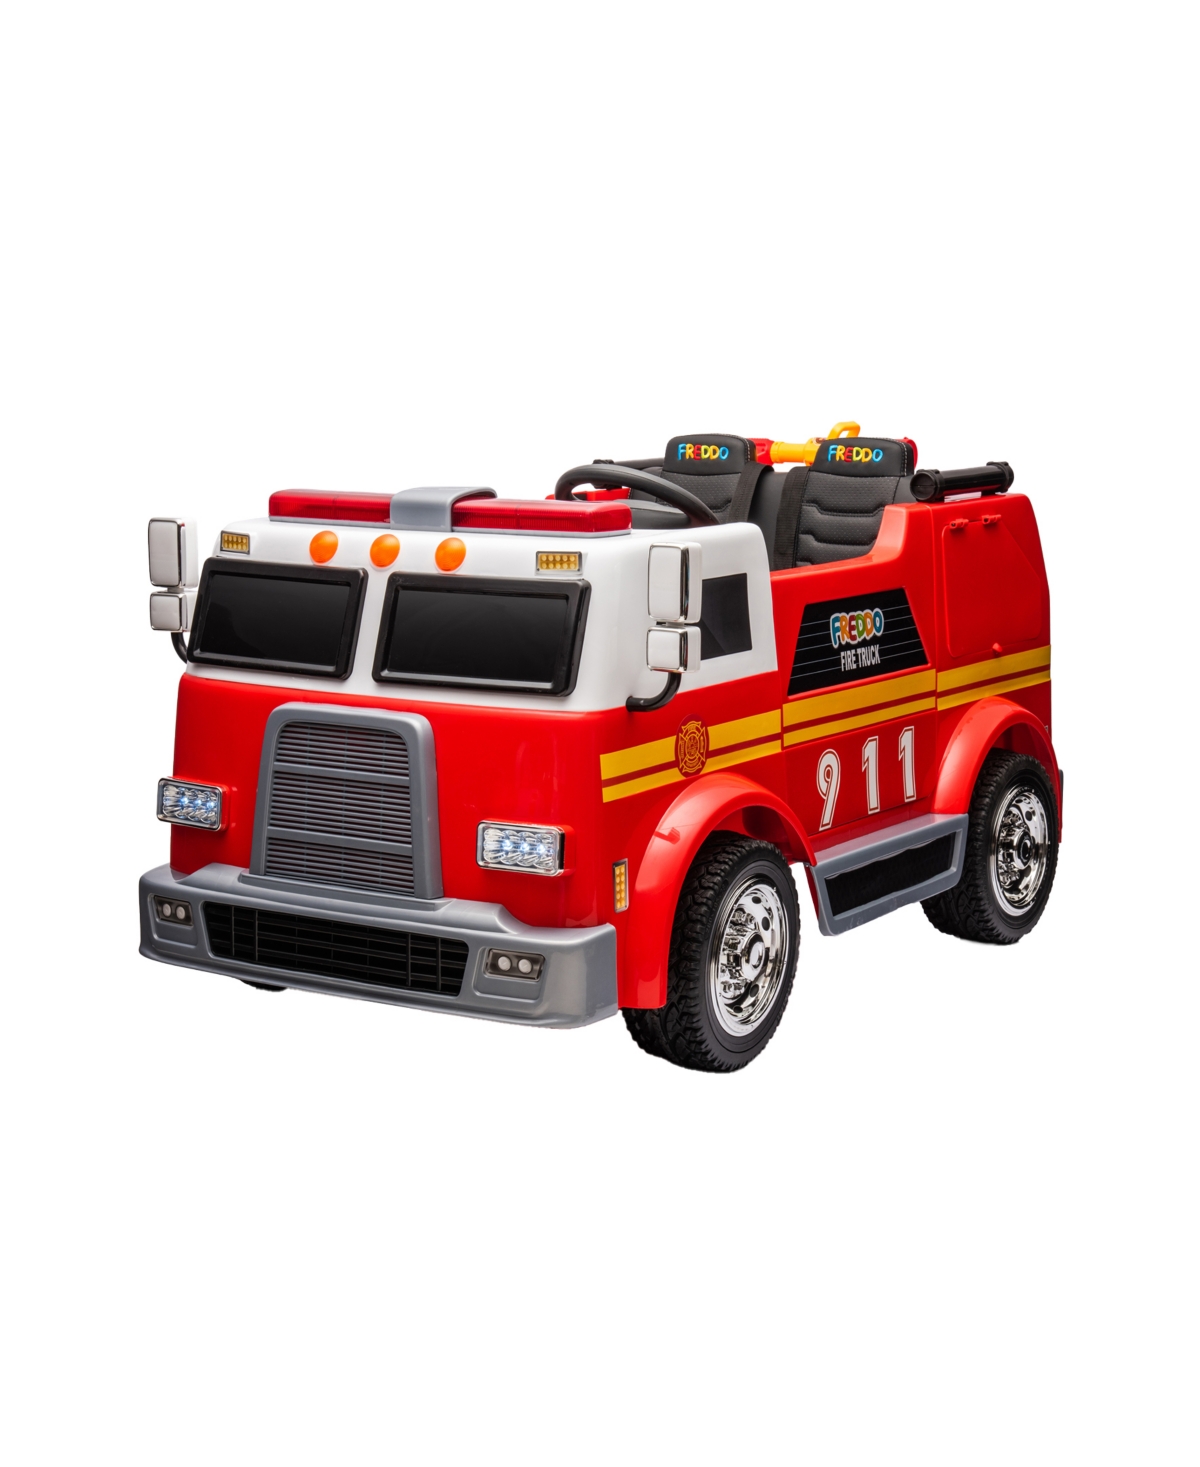 Freddo Kids' Fire Truck 24 Volt 2-seater Ride-on With Led Lights, Water Shooter, Parental Control In Red